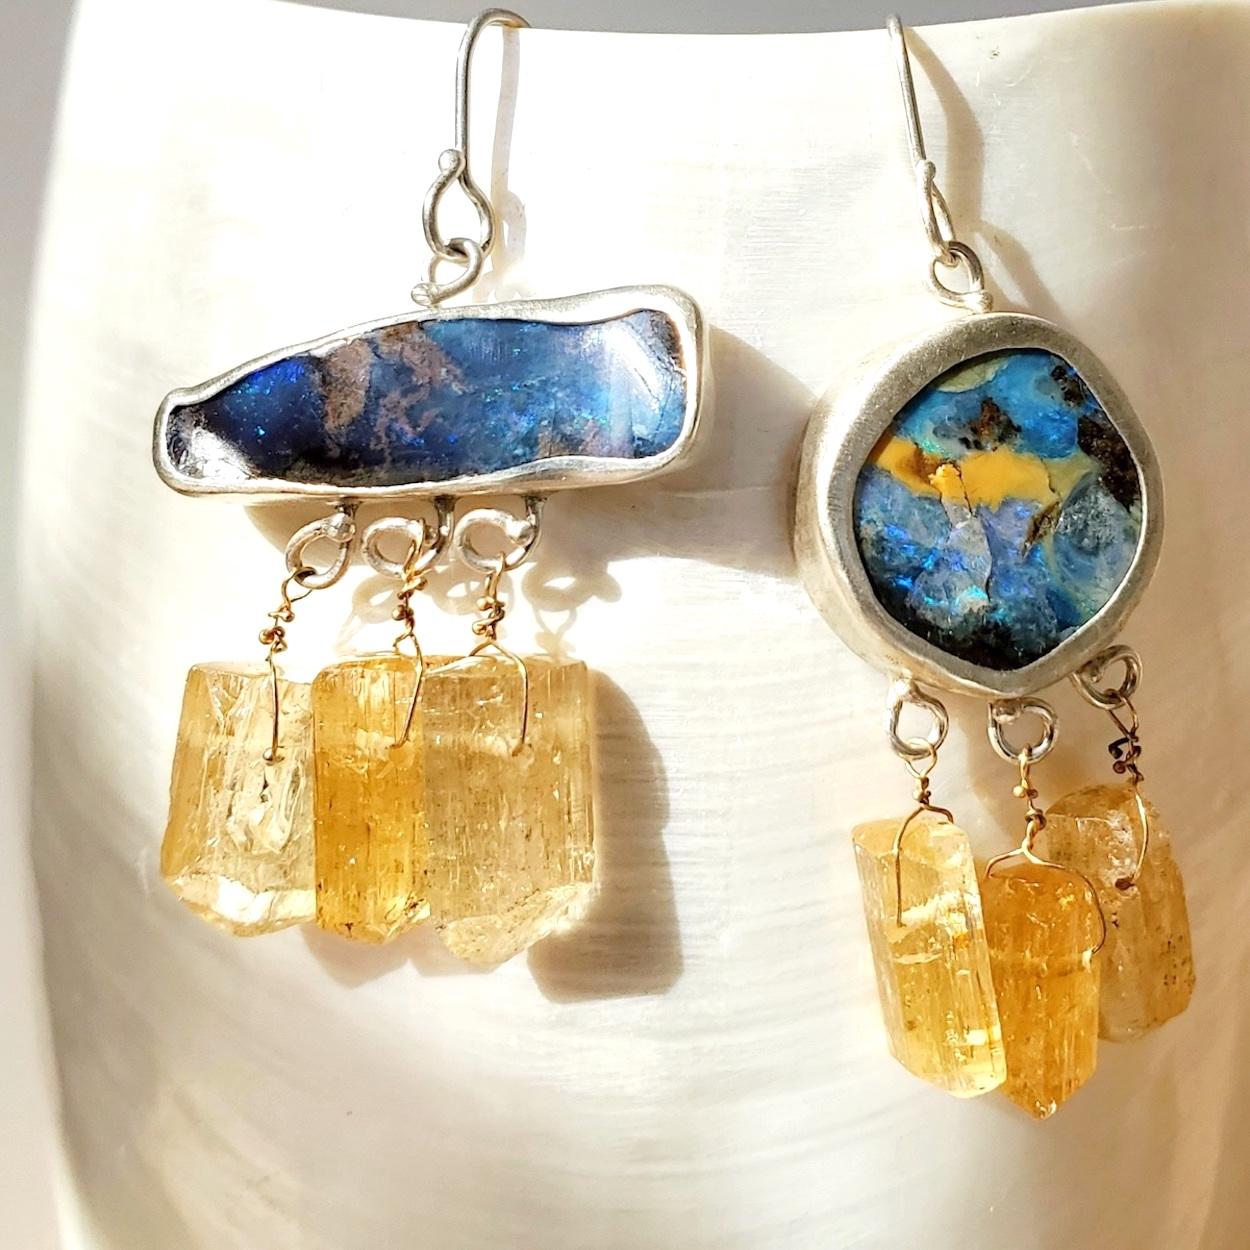 Mismatched Australian boulder opal earrings with a trio of Imperial topaz crystal drops. Natural topaz crystal fringe drops are 